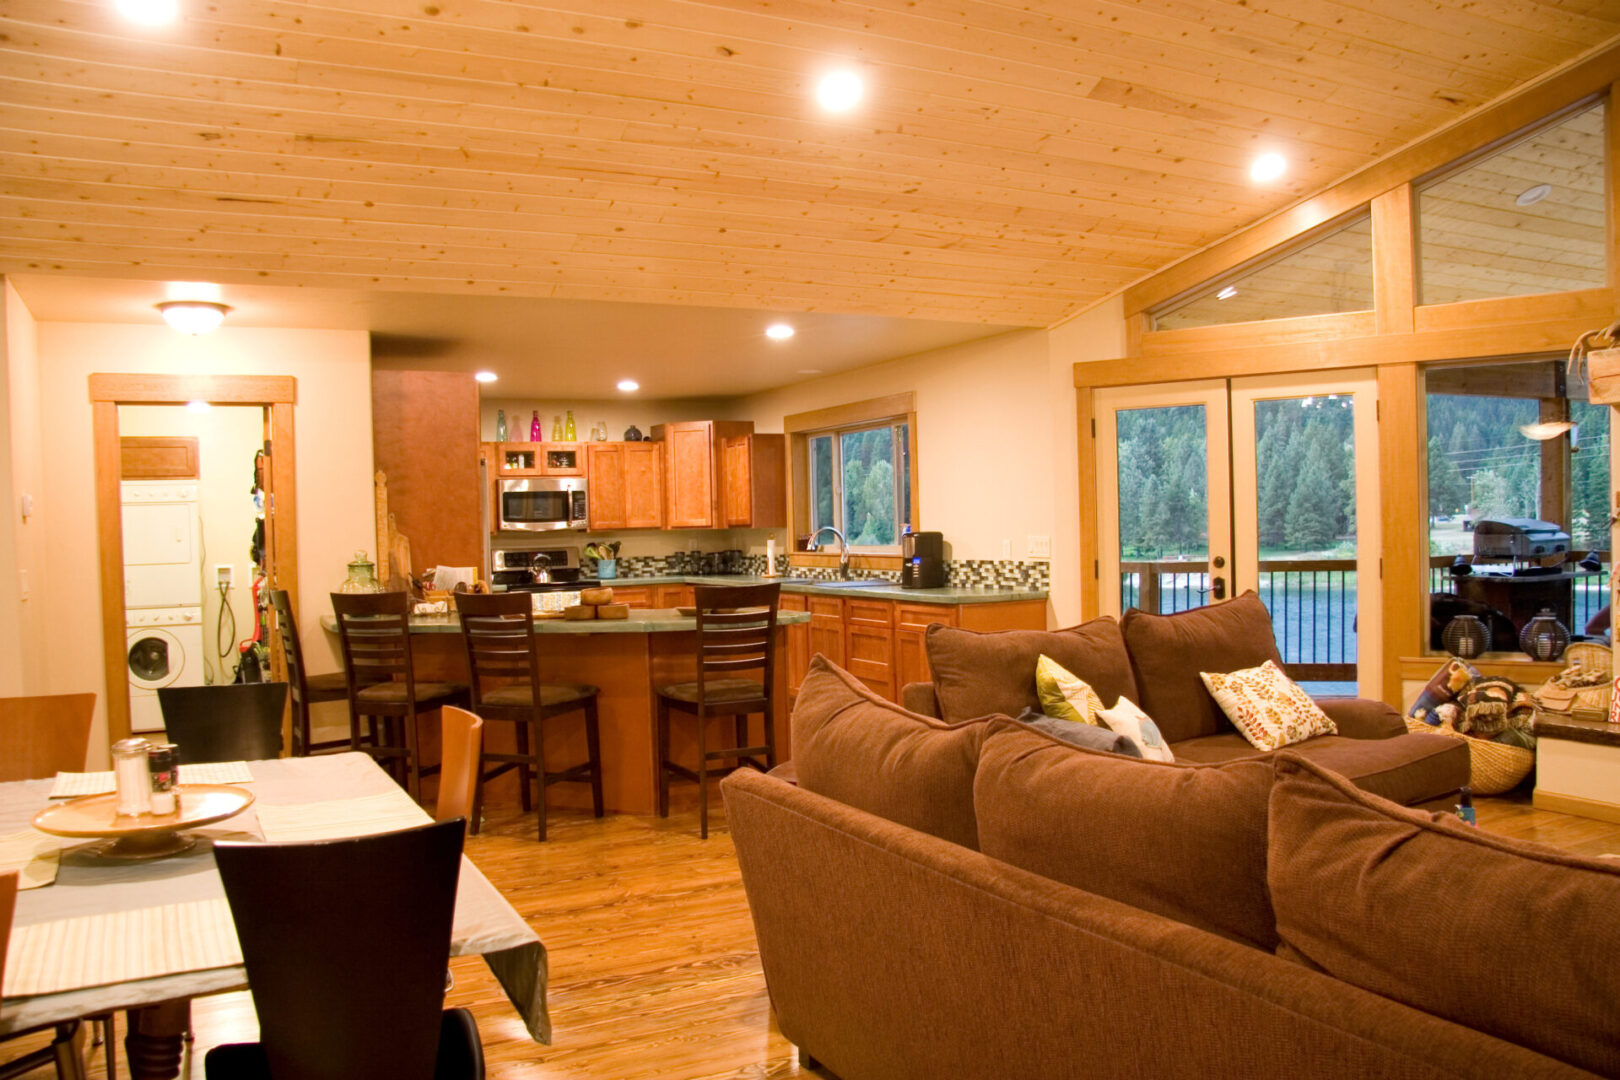 Wooden-themed residential floor with living space, kitchen, and dining areas 